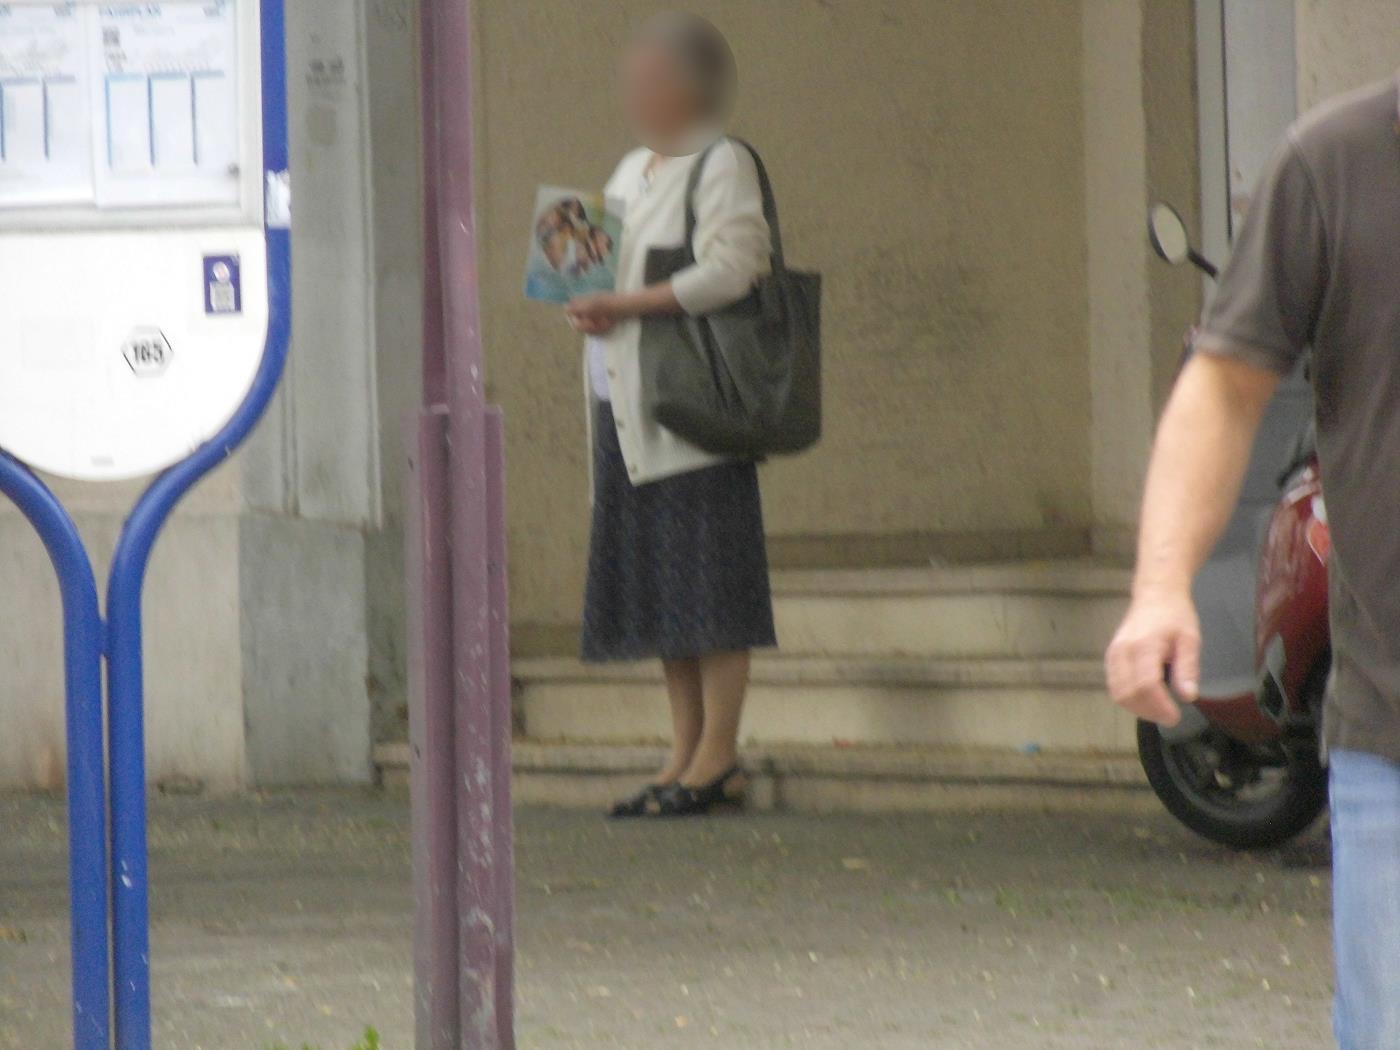 Are you sure you can't photograph Jehovah's Witnesses?